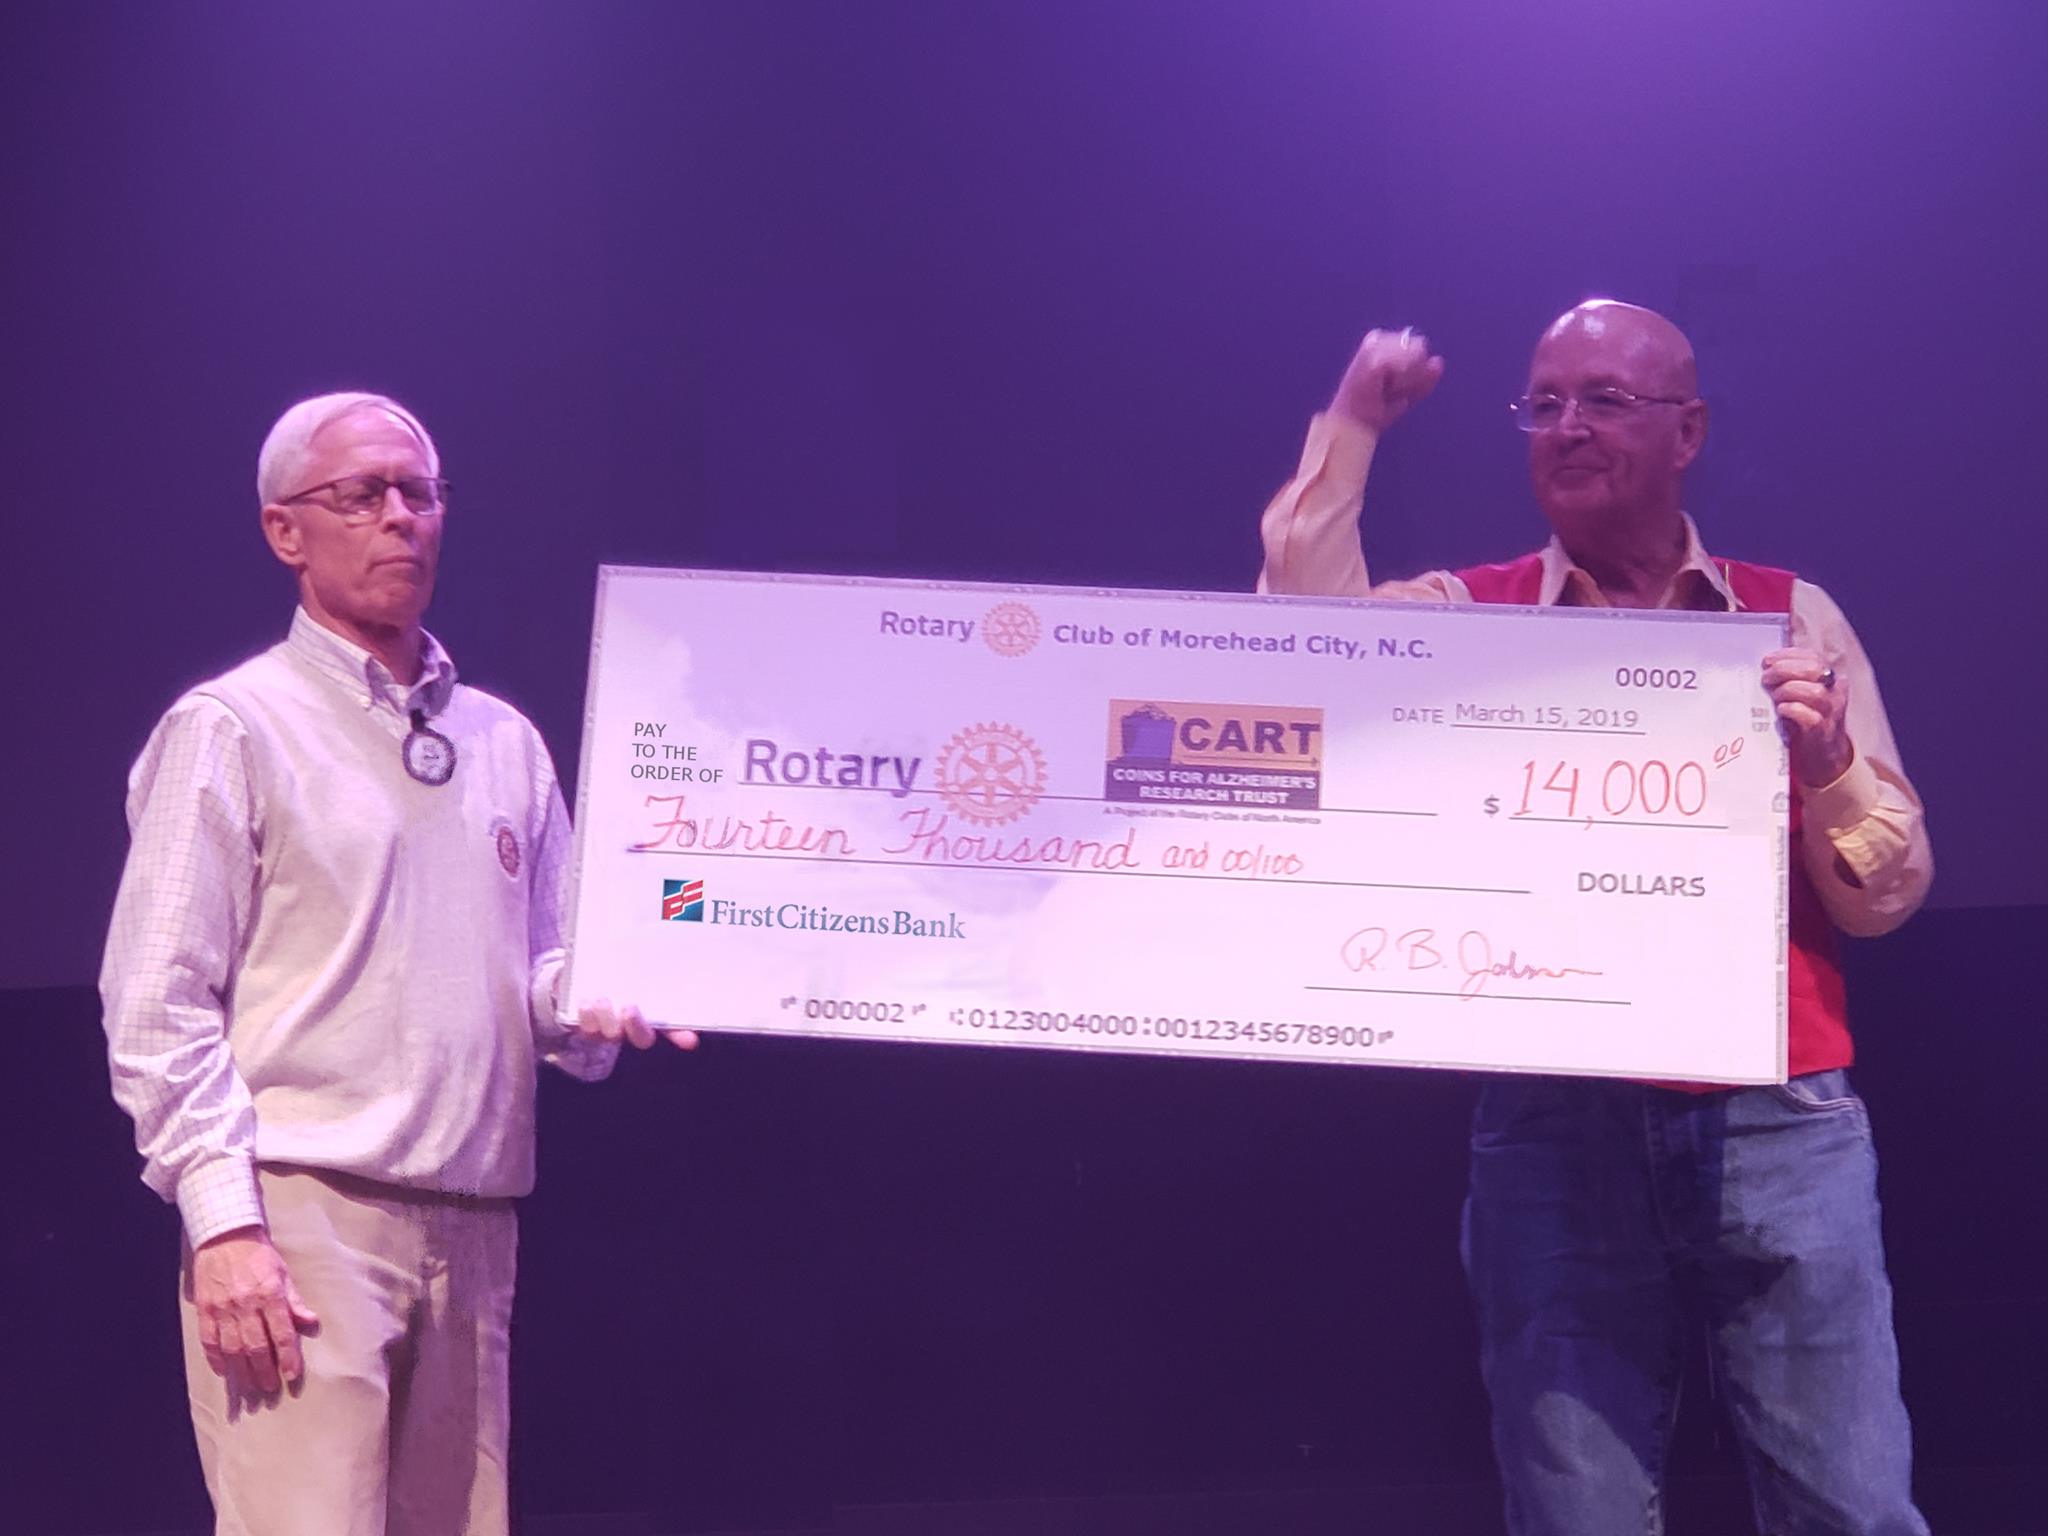 Rotary Club of Morehead City (NC) Raises $14,000 for The CART Fund